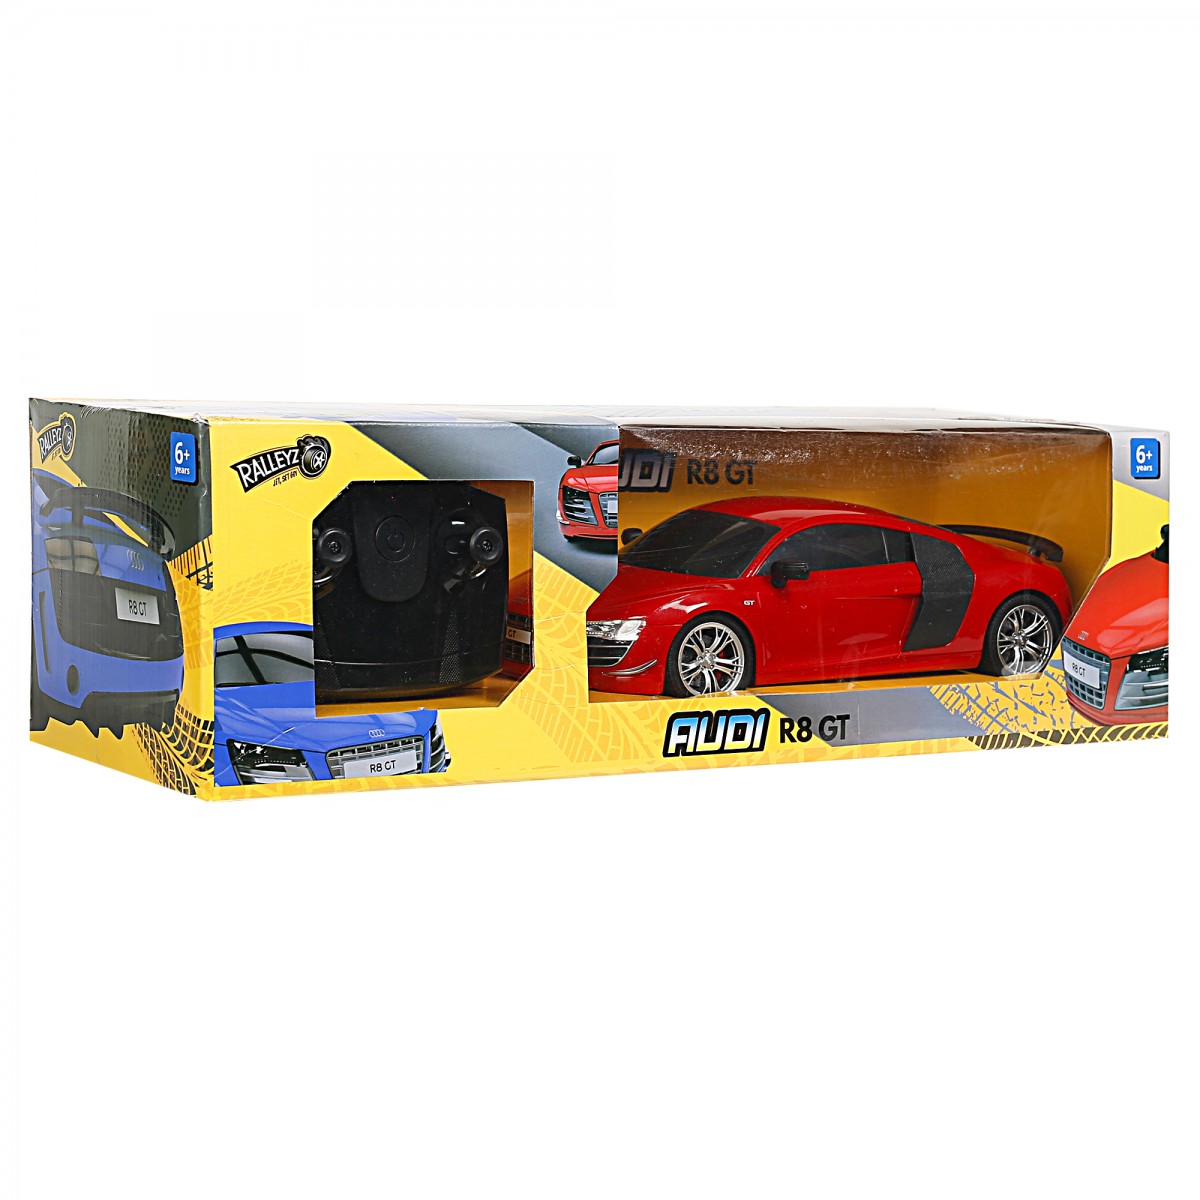 Ralleys Audi R8 GT Remote Control Car for Kids, 6Y+, Red